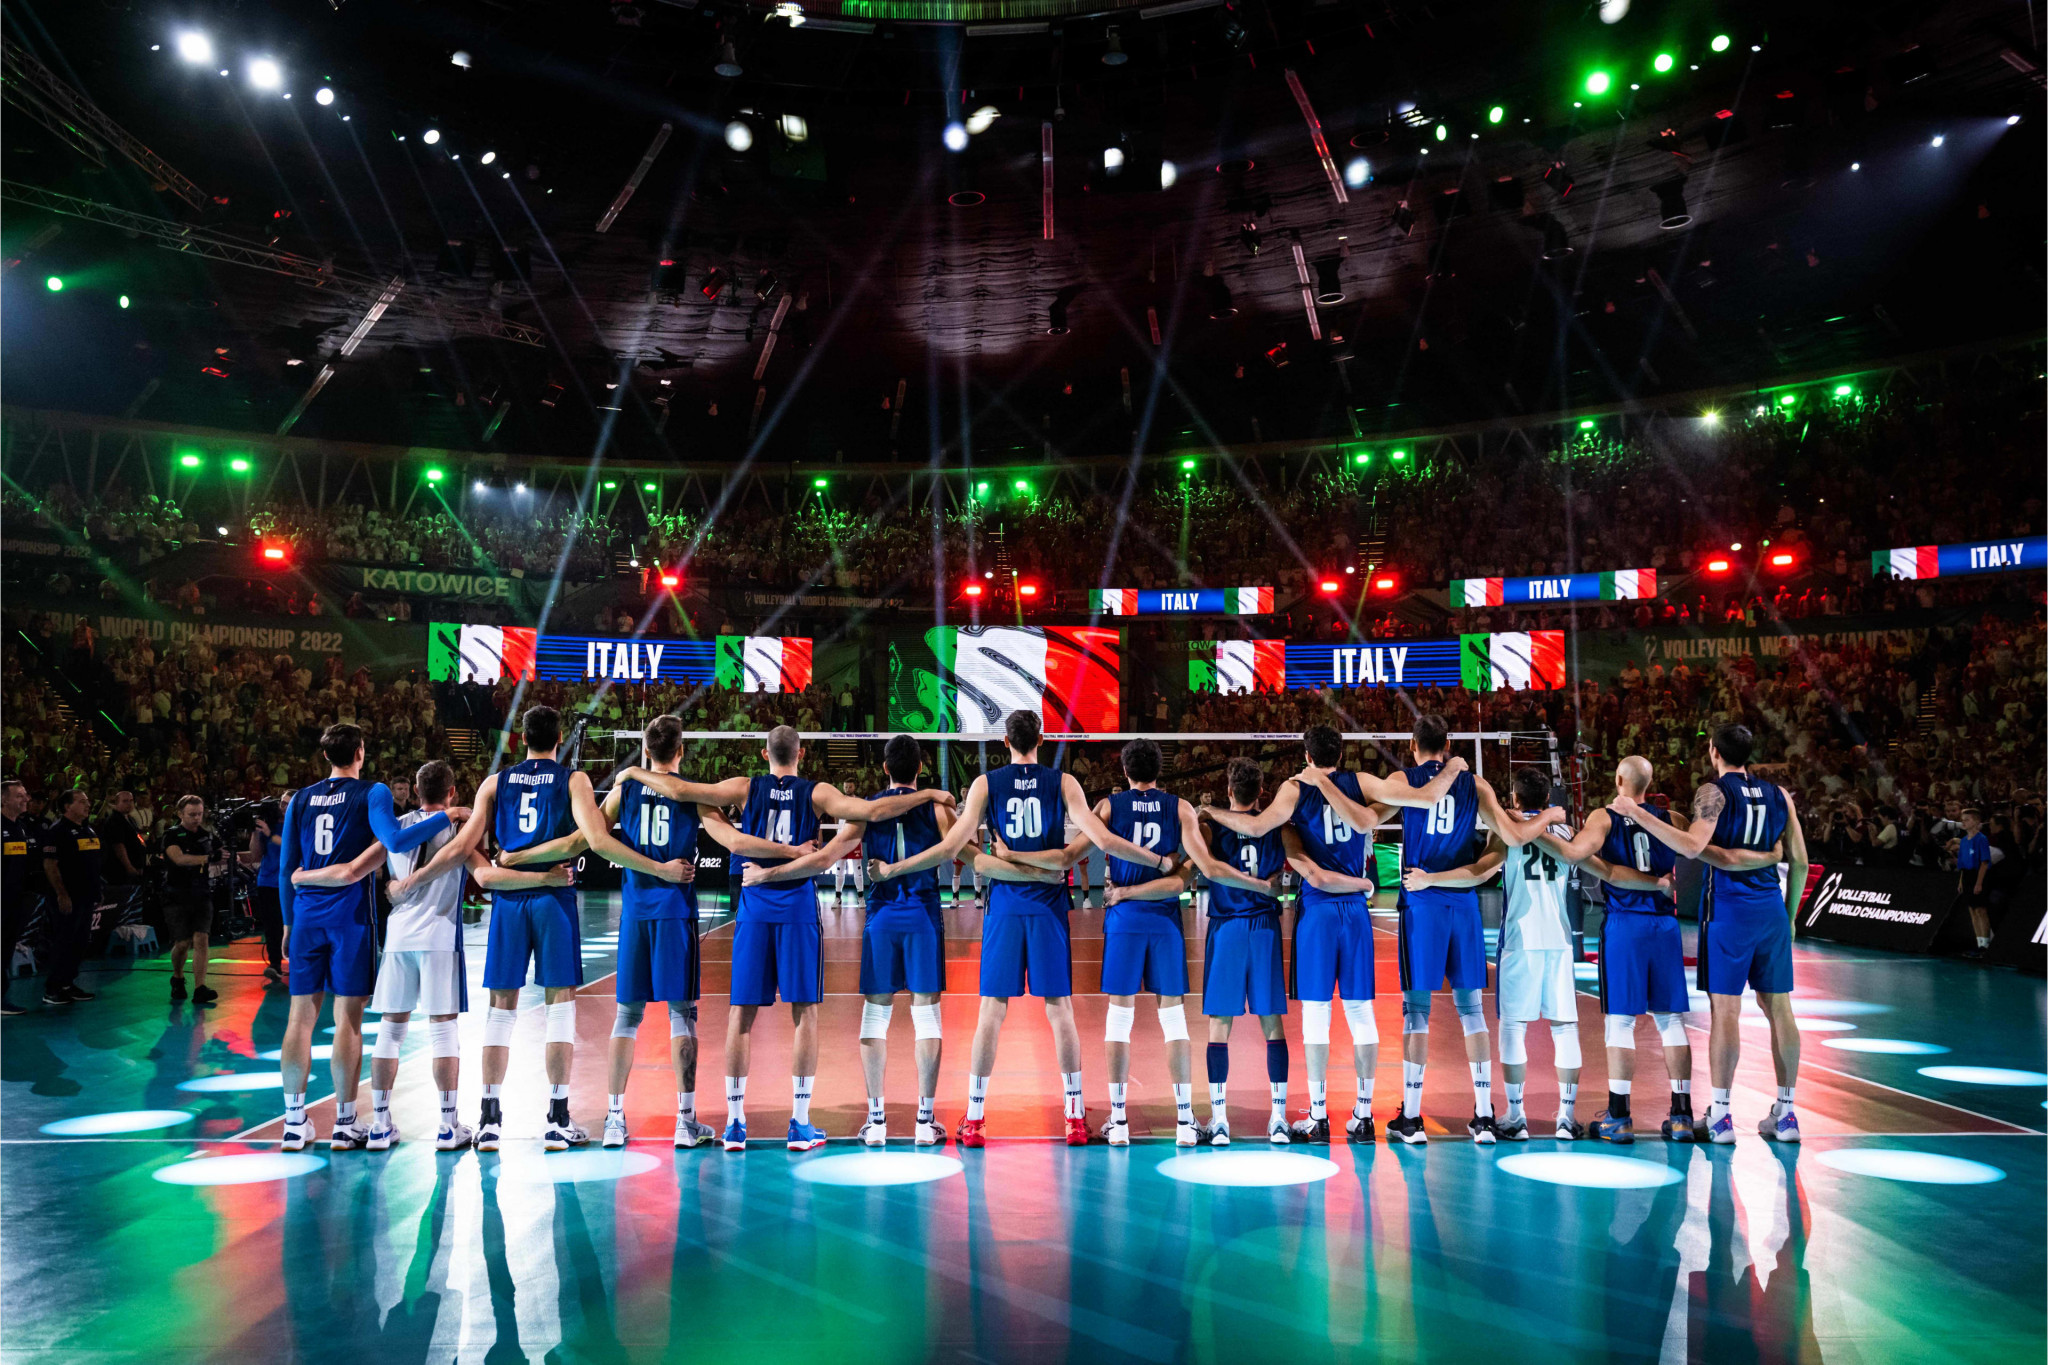 Italy beat Poland 3-1 to win the Men's Volleyball World Championship title in Katowice ©Volleyball World